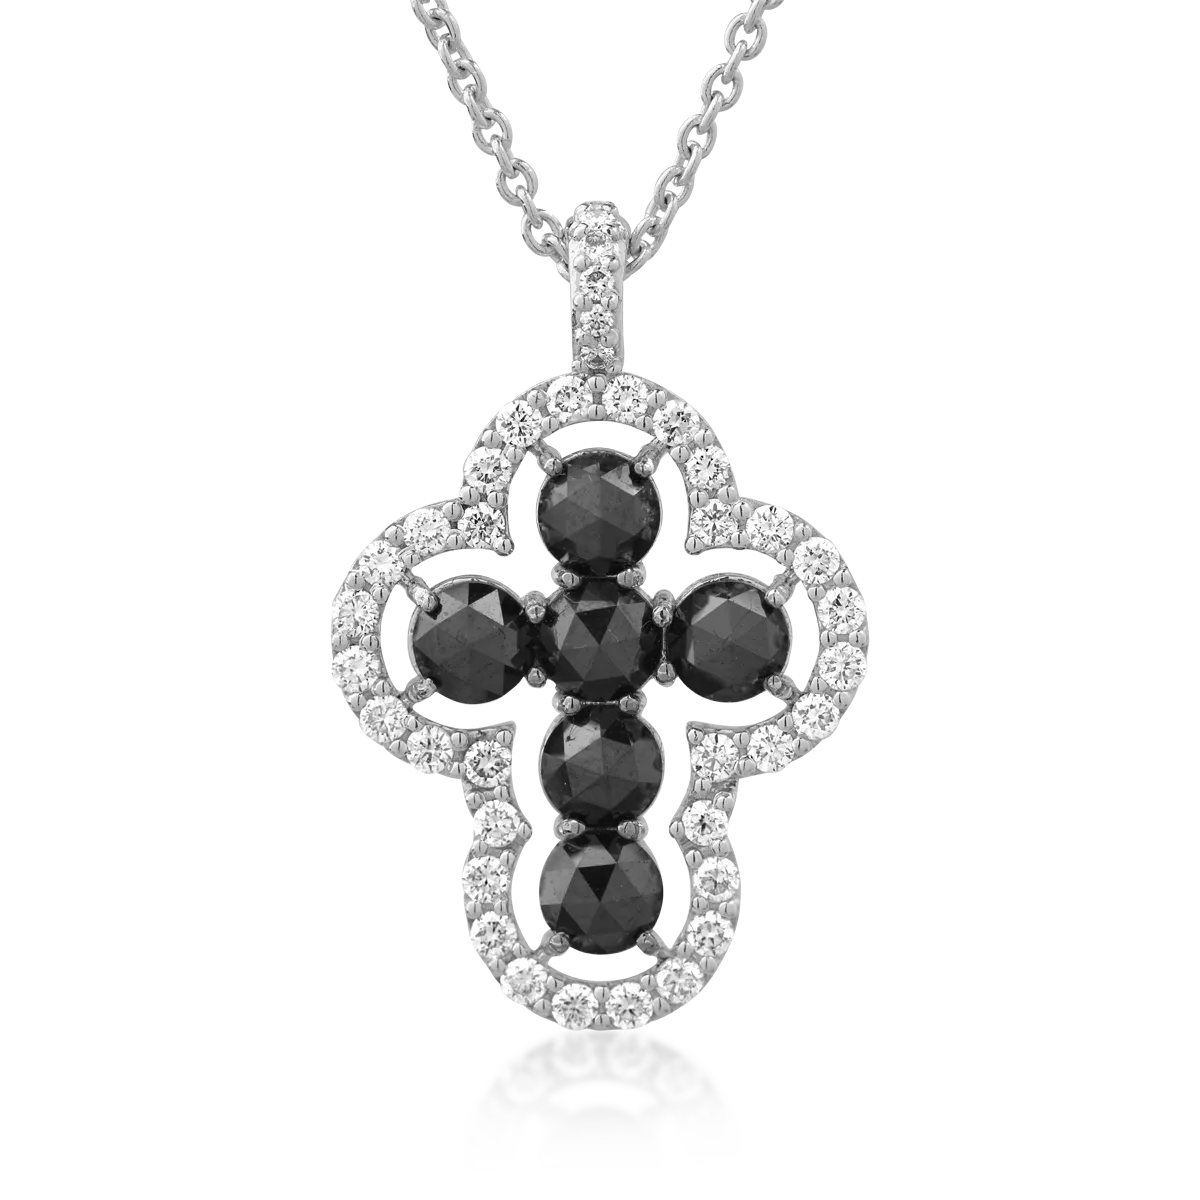 18K white gold cross pendant necklace with 0.88 black diamonds and 0.33ct clear diamonds